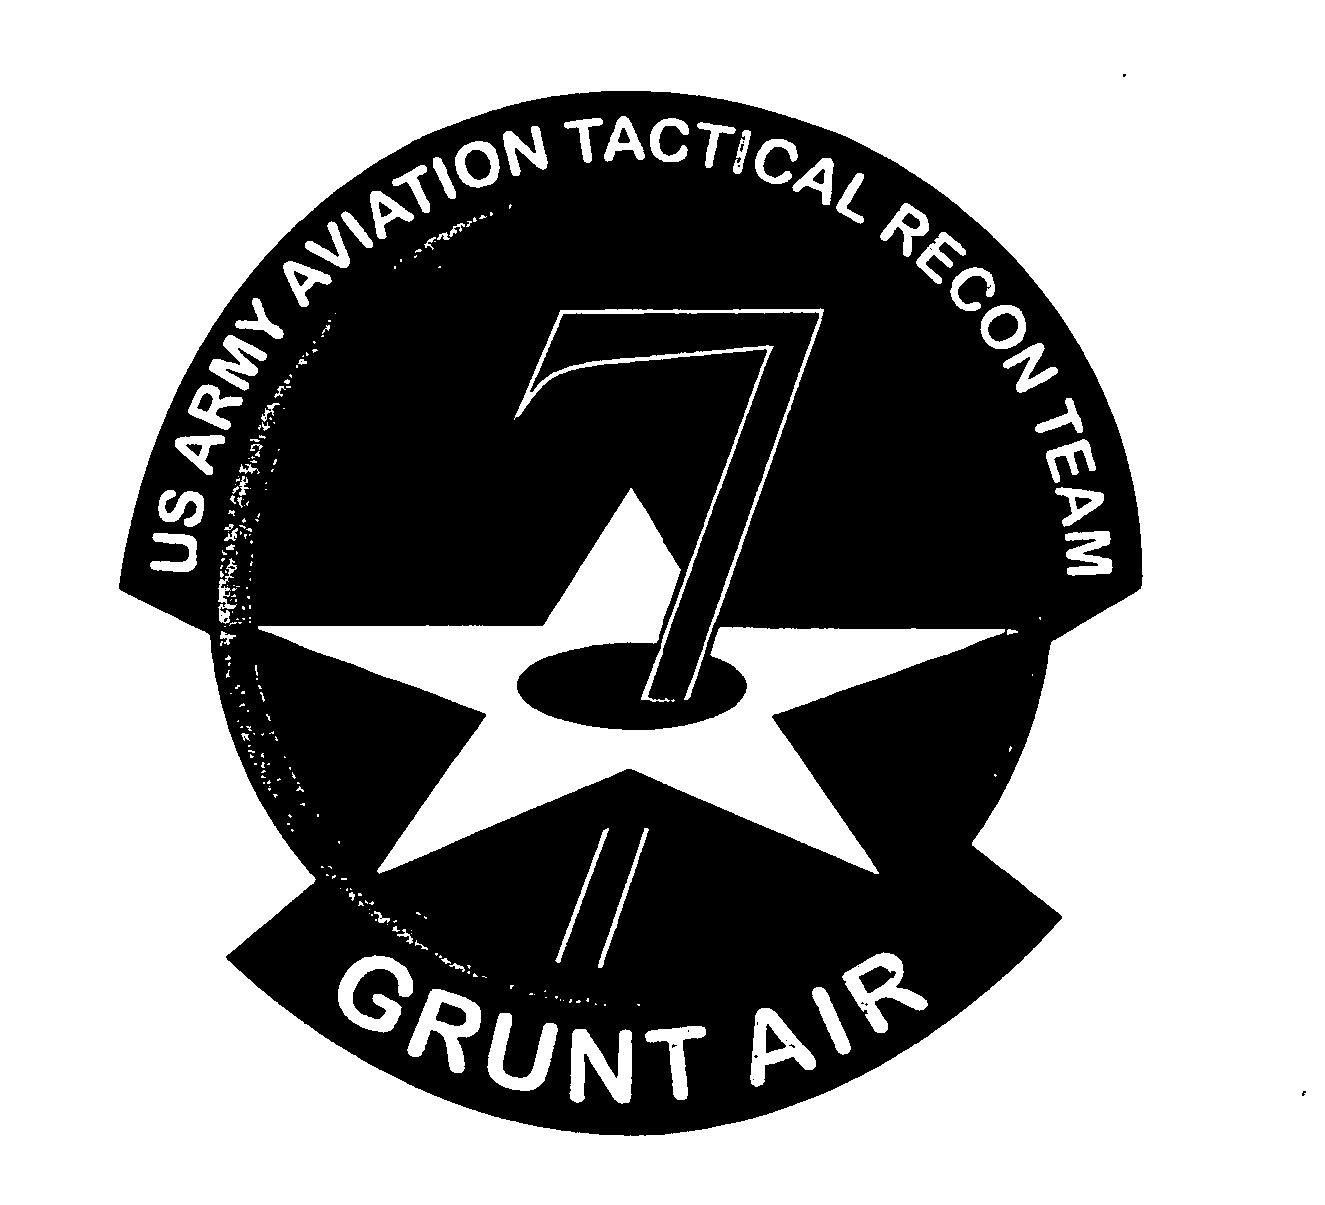  US ARMY AVIATION TACTICAL RECON TEAM GRUNT AIR 7